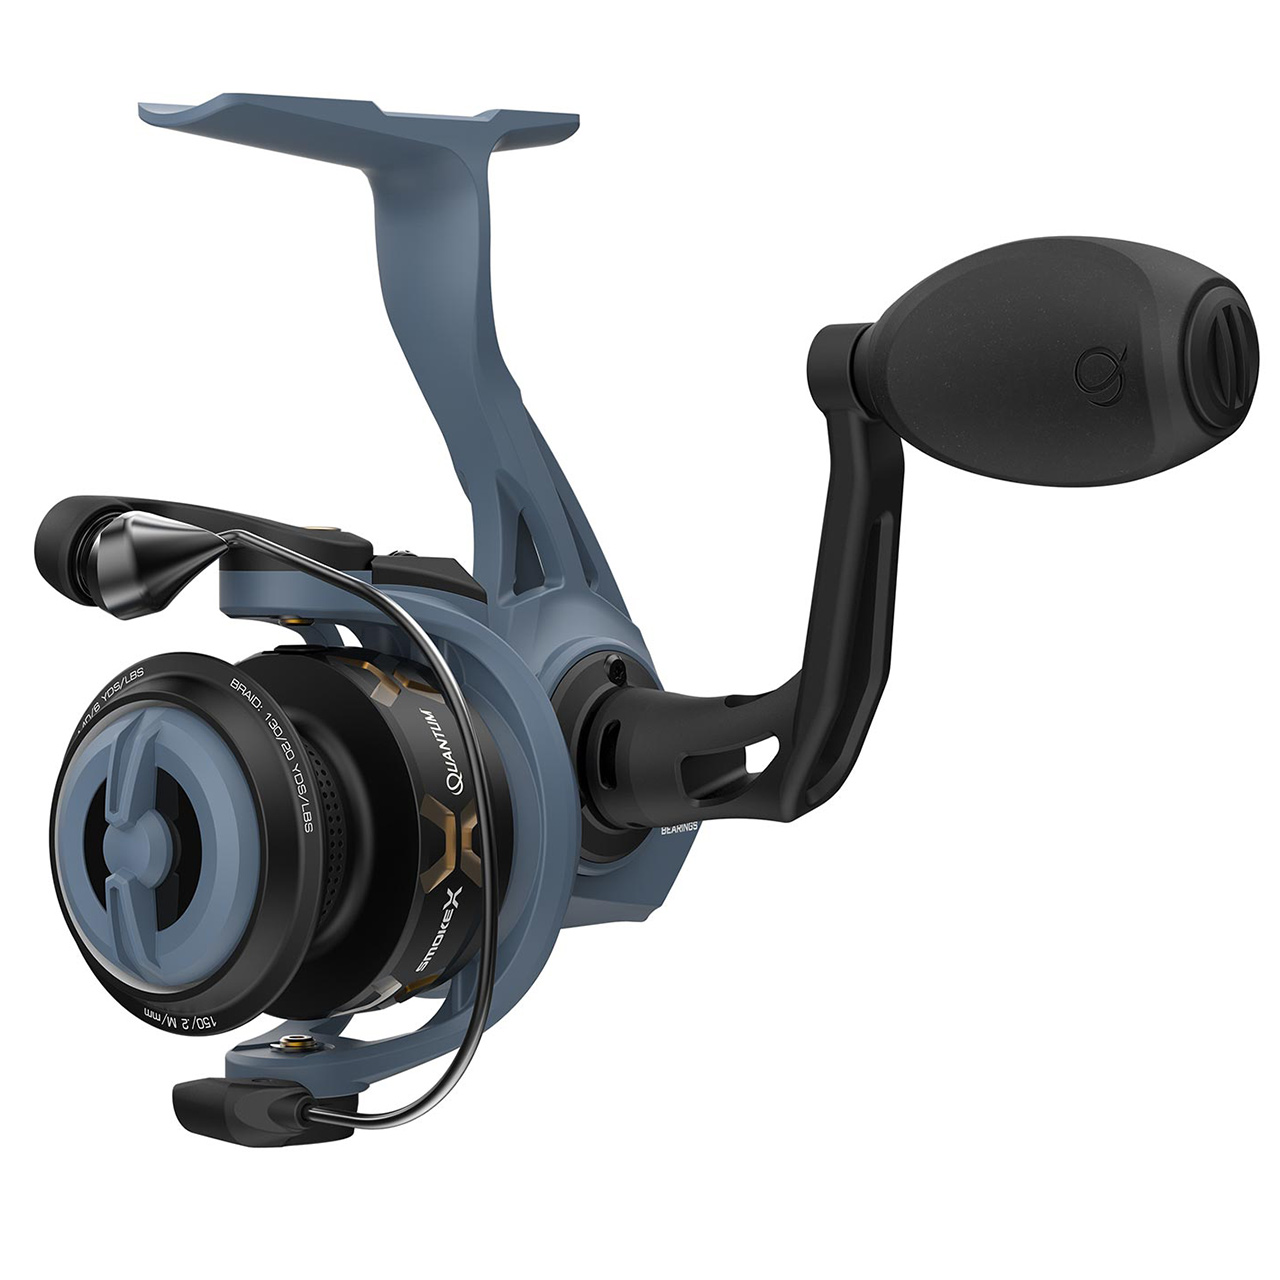 Pflueger Patriarch baitcasting reel - Fishing Rods, Reels, Line, and Knots  - Bass Fishing Forums